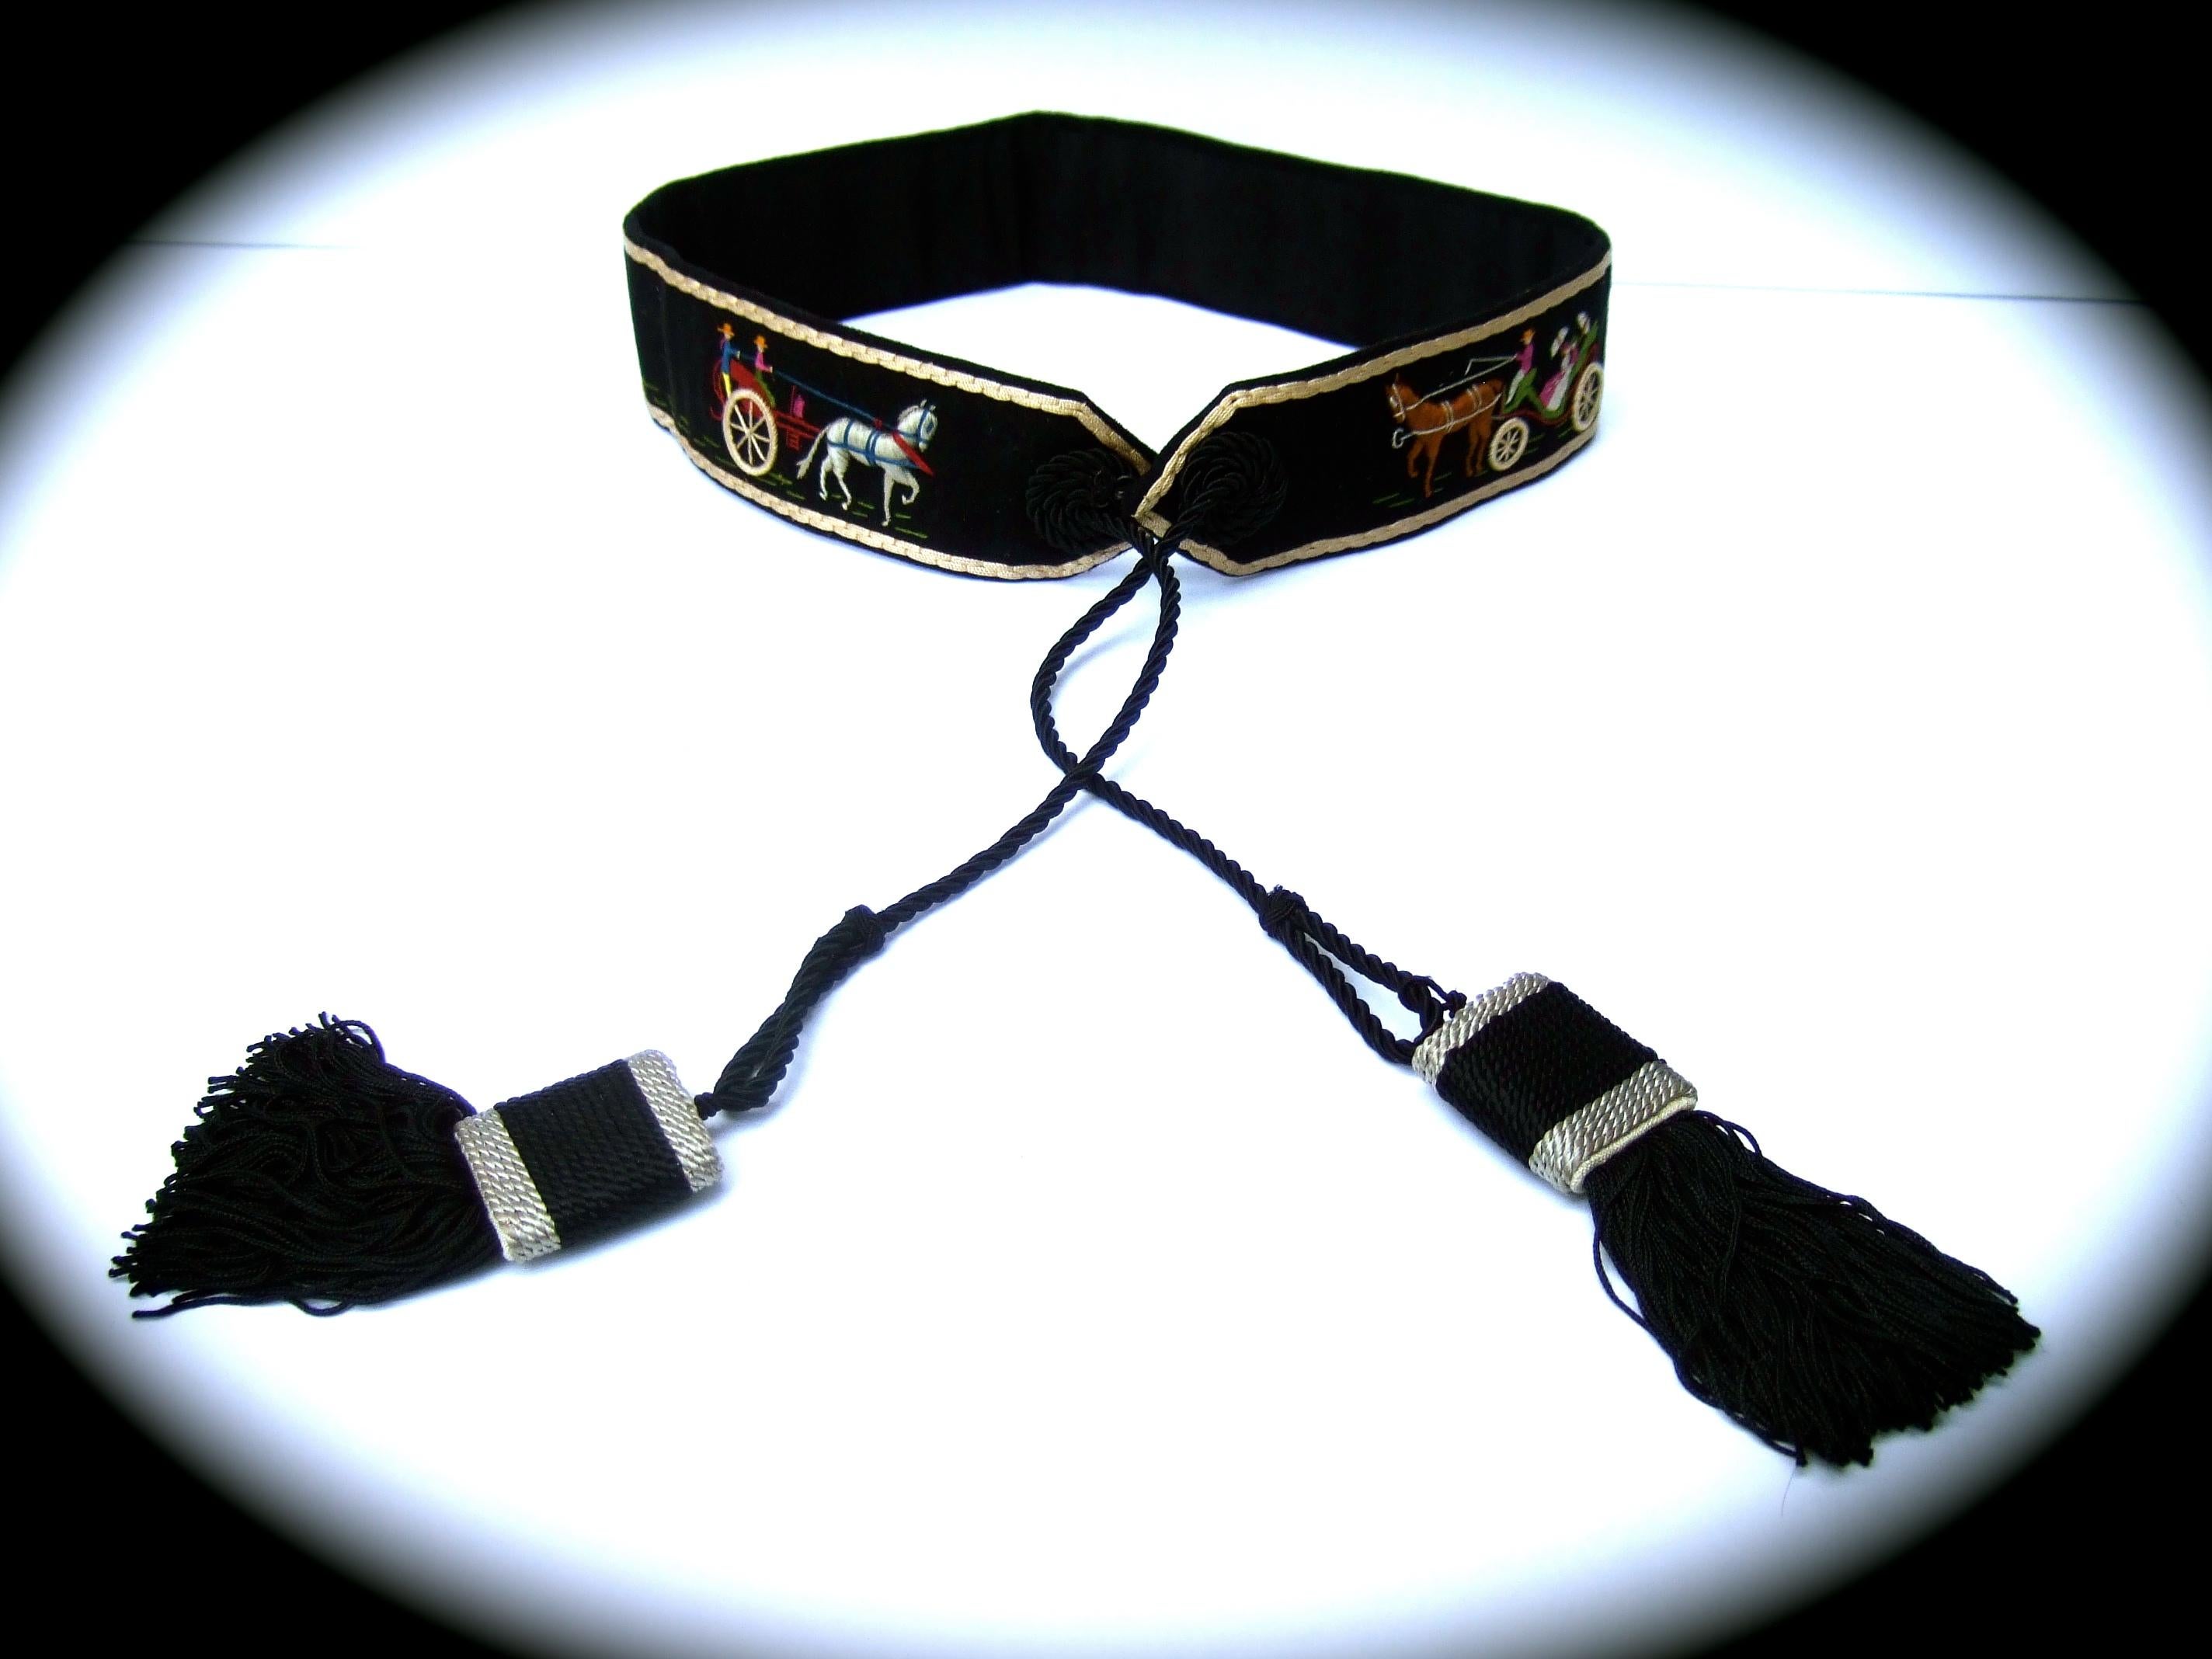 Hermes Paris Rare handmade cloth artisan embroidered tassel belt c 1970s 
The unique black cloth wool belt is embellished with three individual embroidered
scenes featuring horse drawn carriages. The lower section is accented with green 
hand